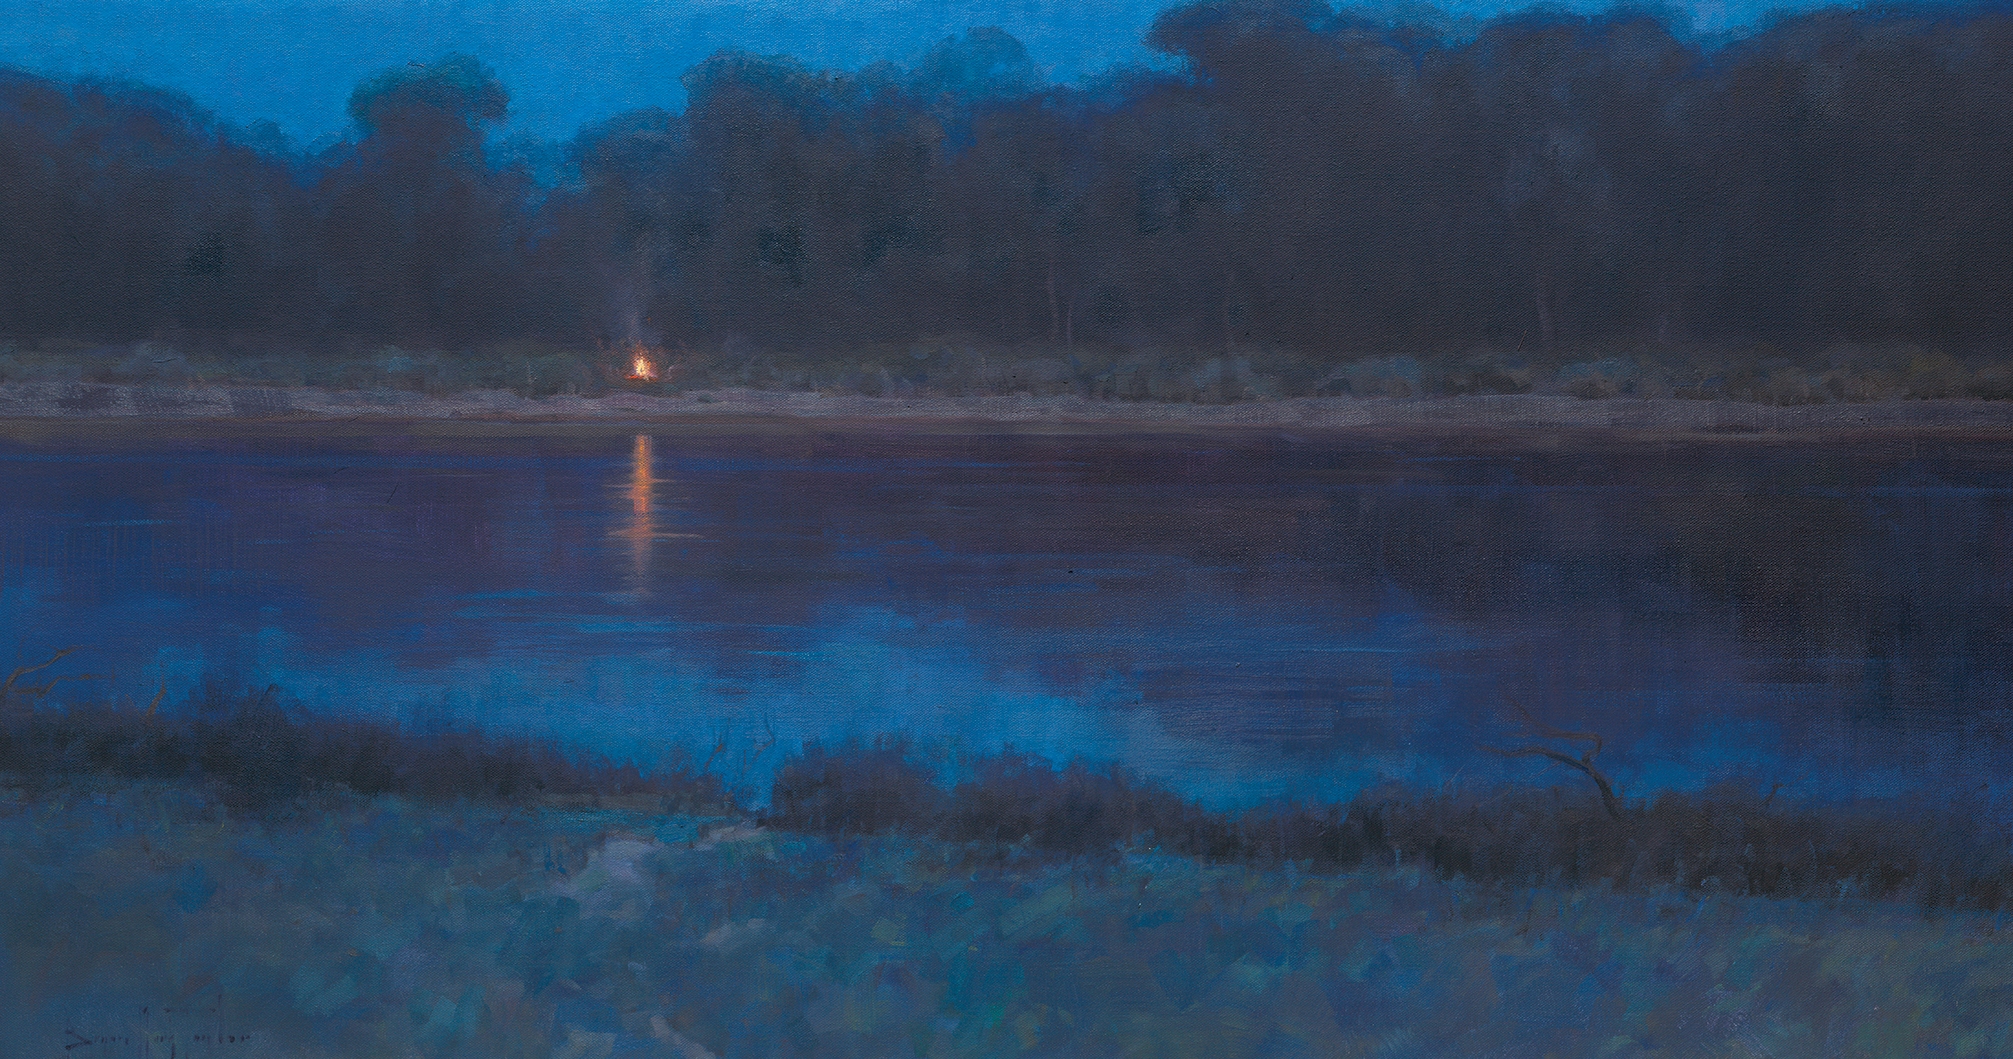 A campfire on the shores of the Missouri River during the evening.  There are trees along the river.